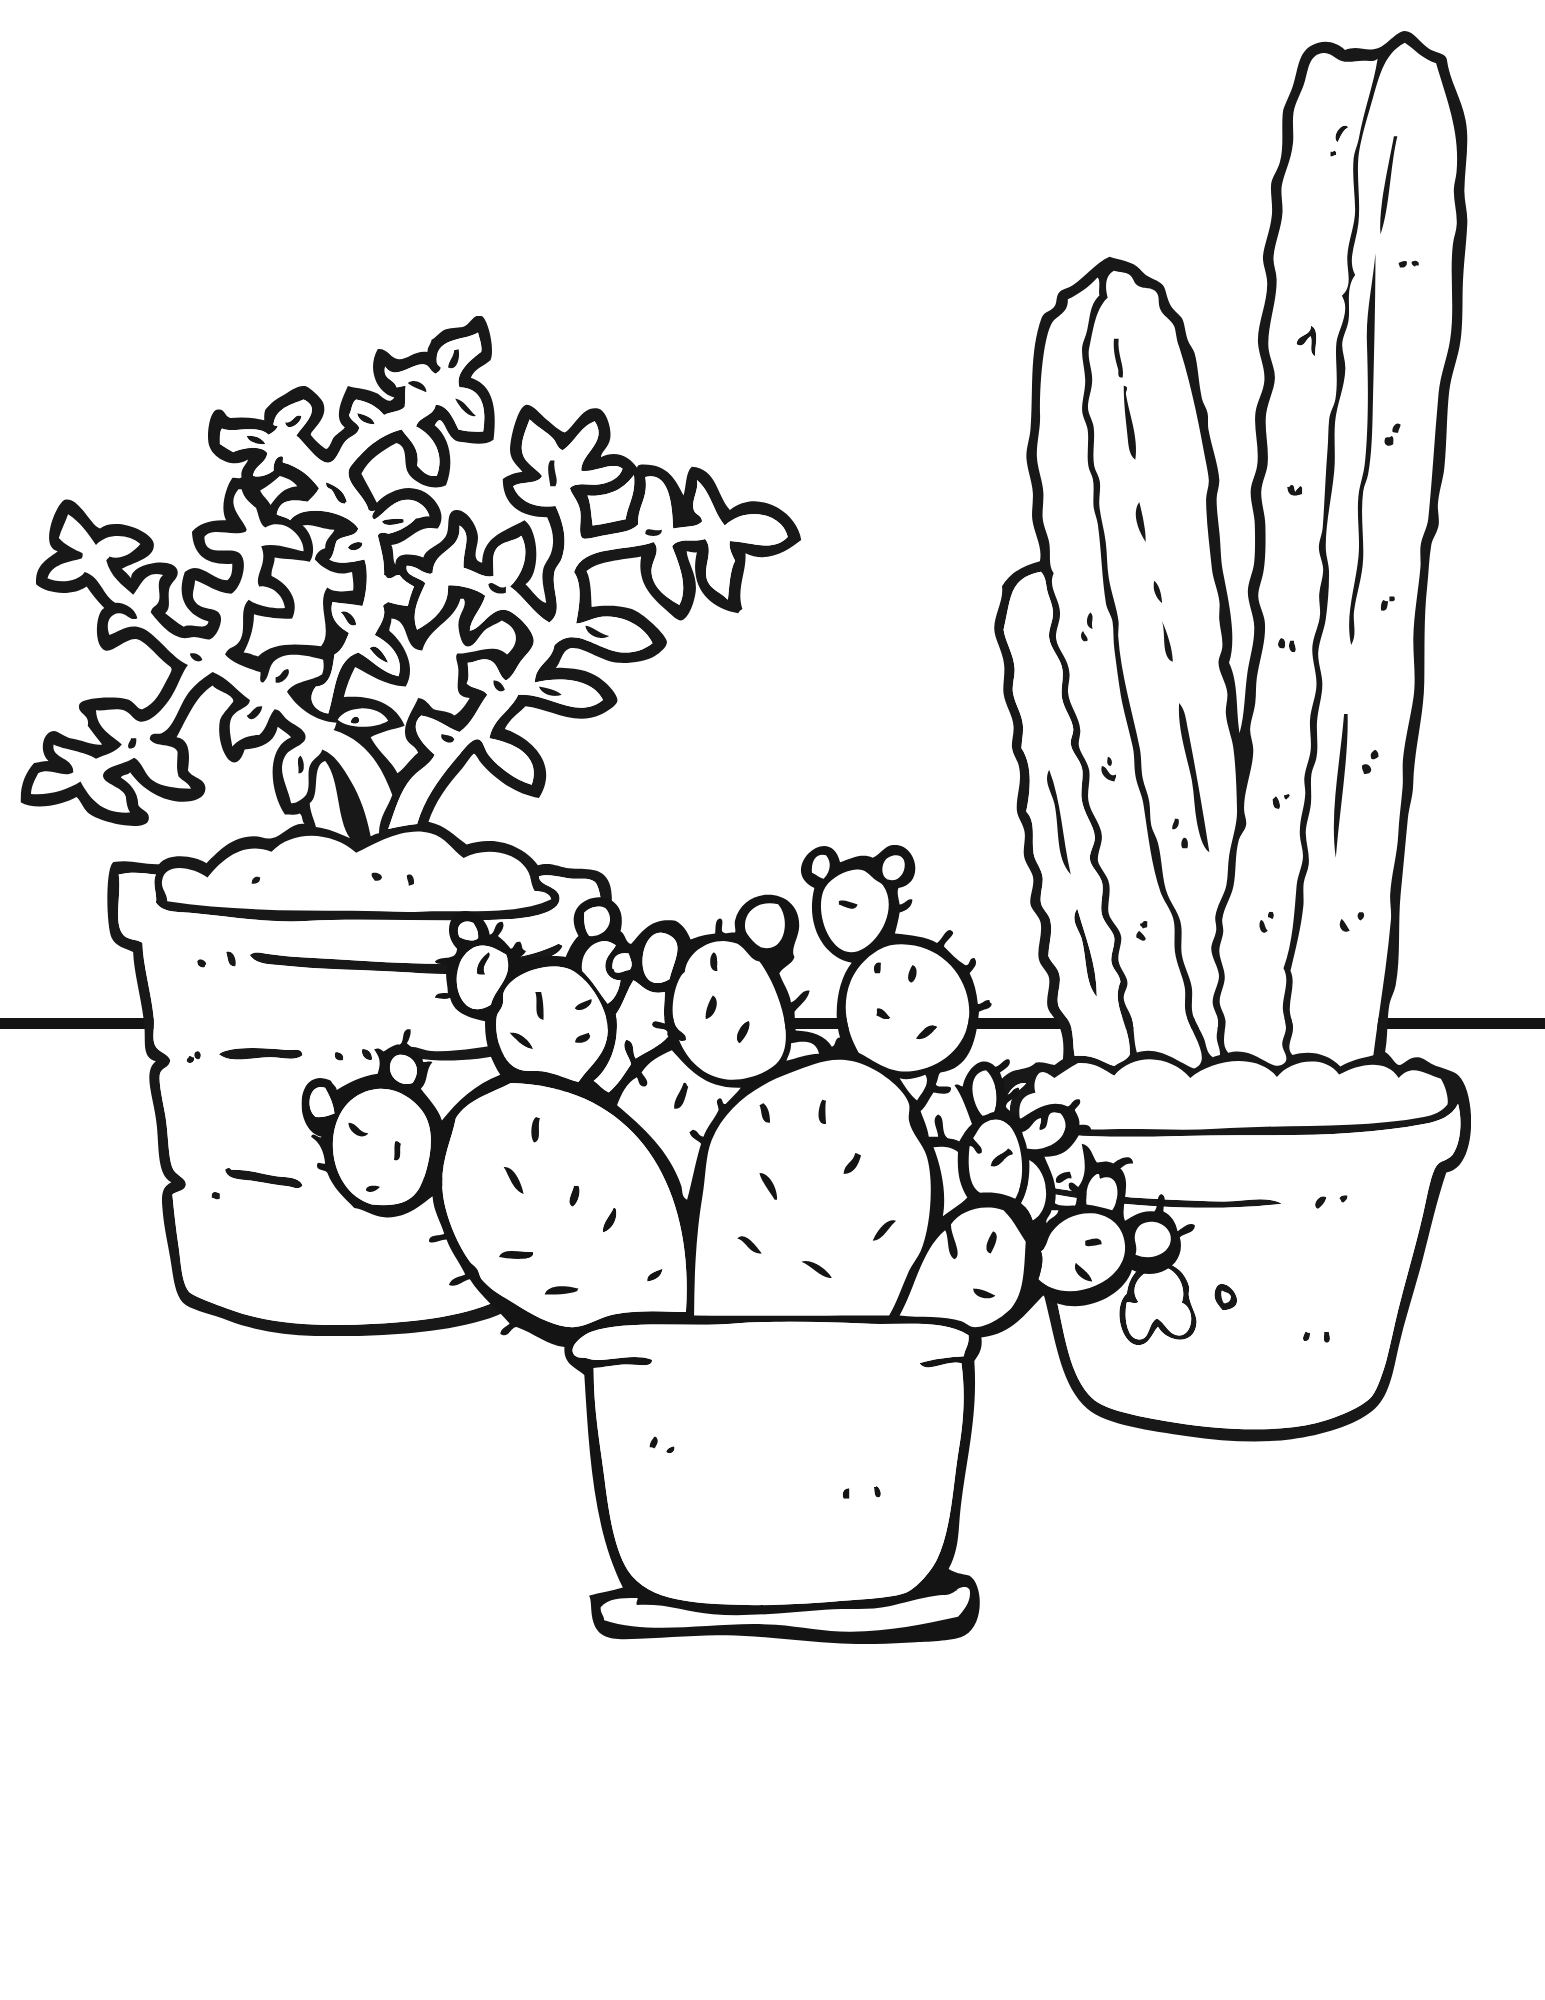 Fruktbar Biggest atomisk plant coloring pages   pittsfieldsaukees.com